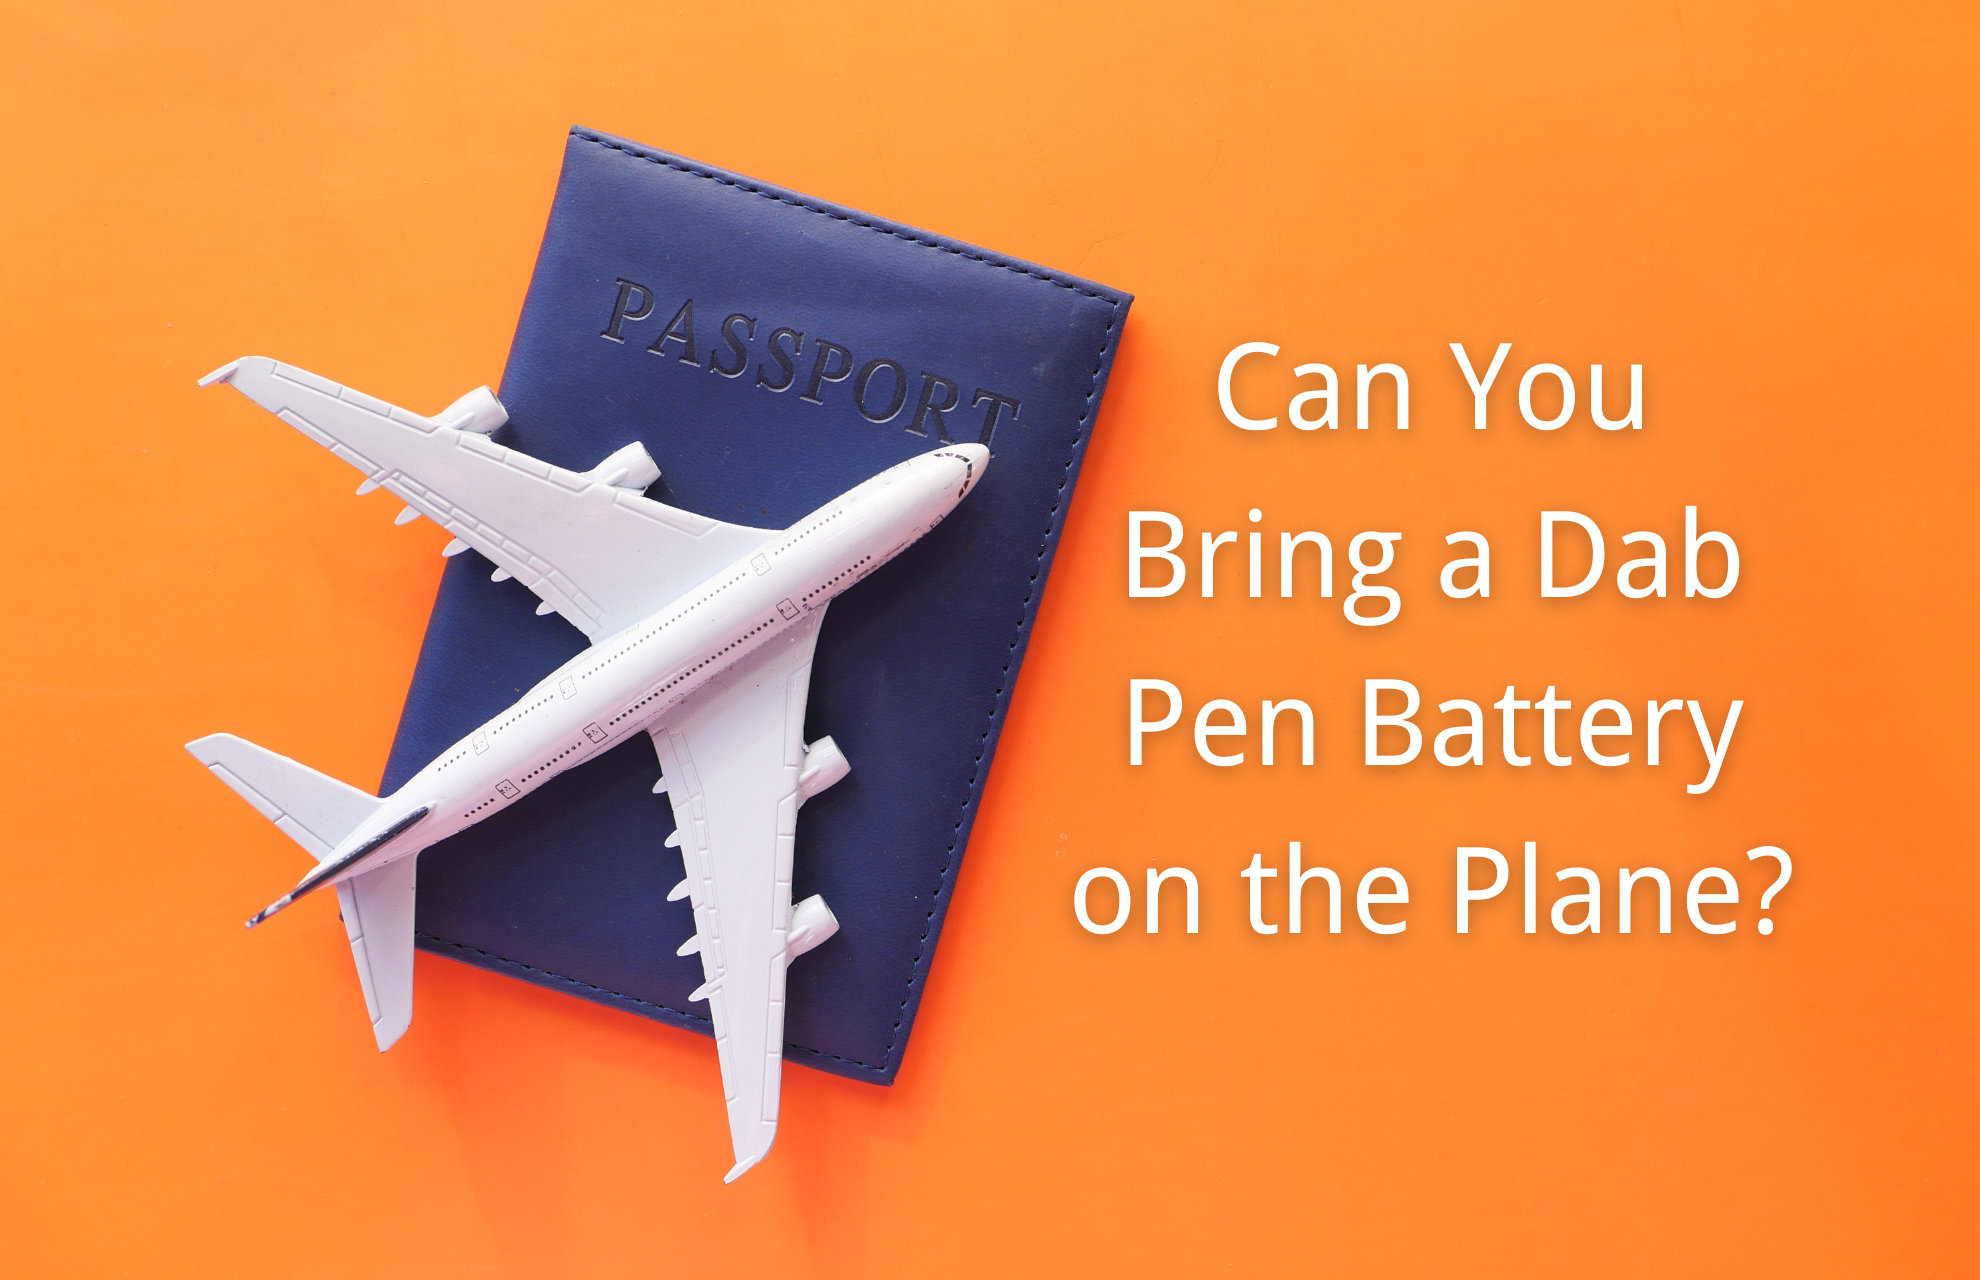 Can You Bring a Dab Pen Battery on the Plane?